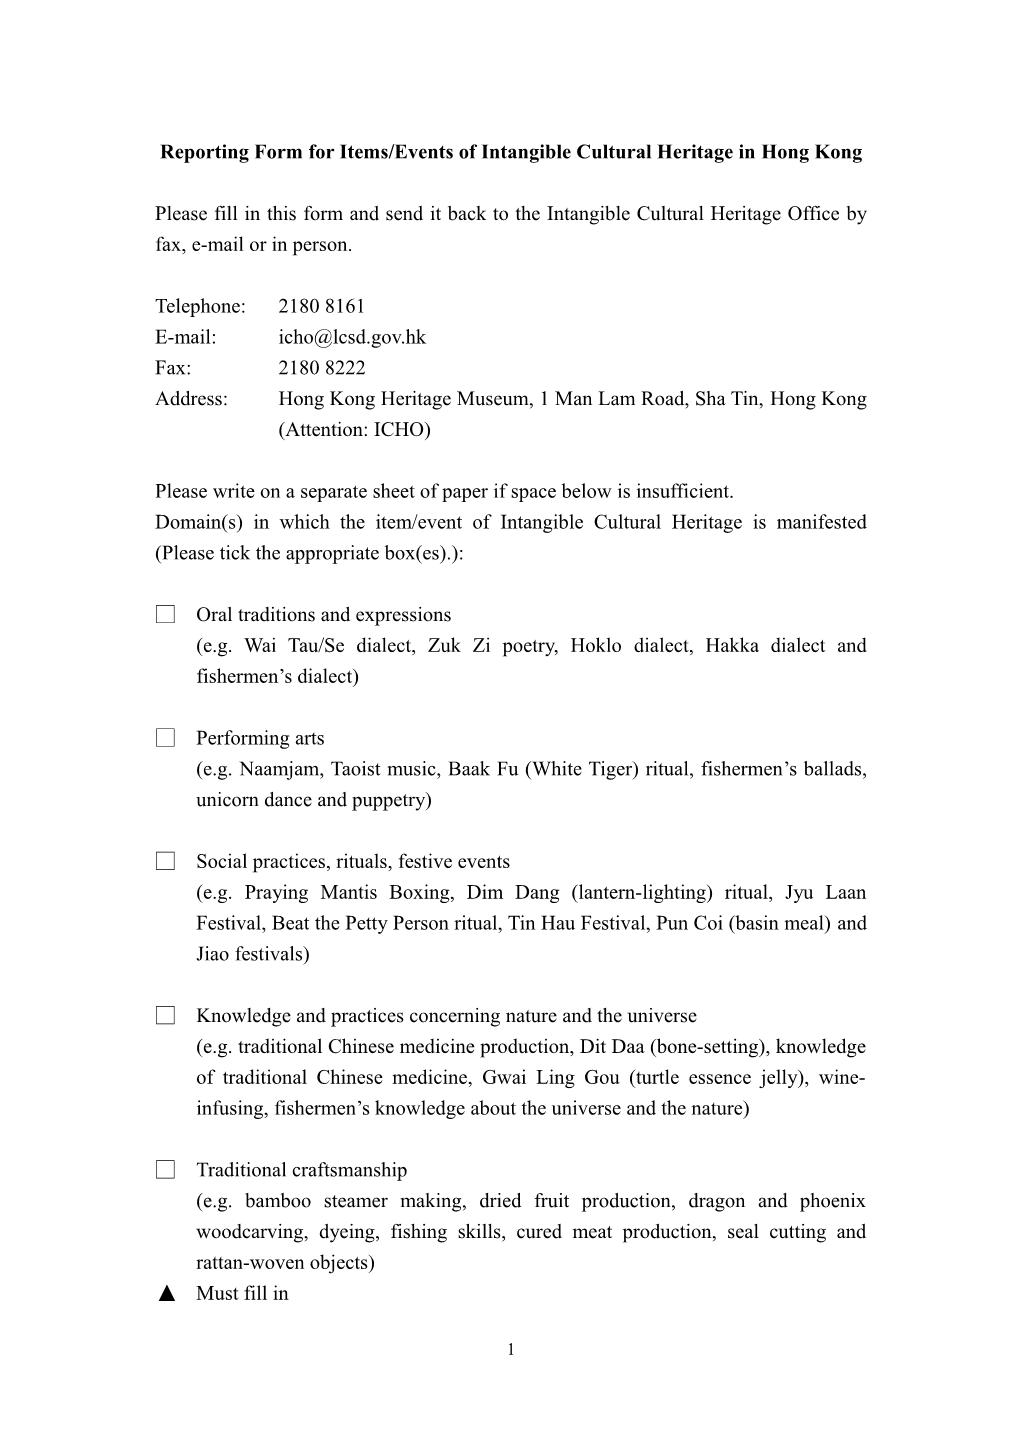 Form 1: Form for Reporting Items/Events of Intangible Cultural Heritage of Hong Kong